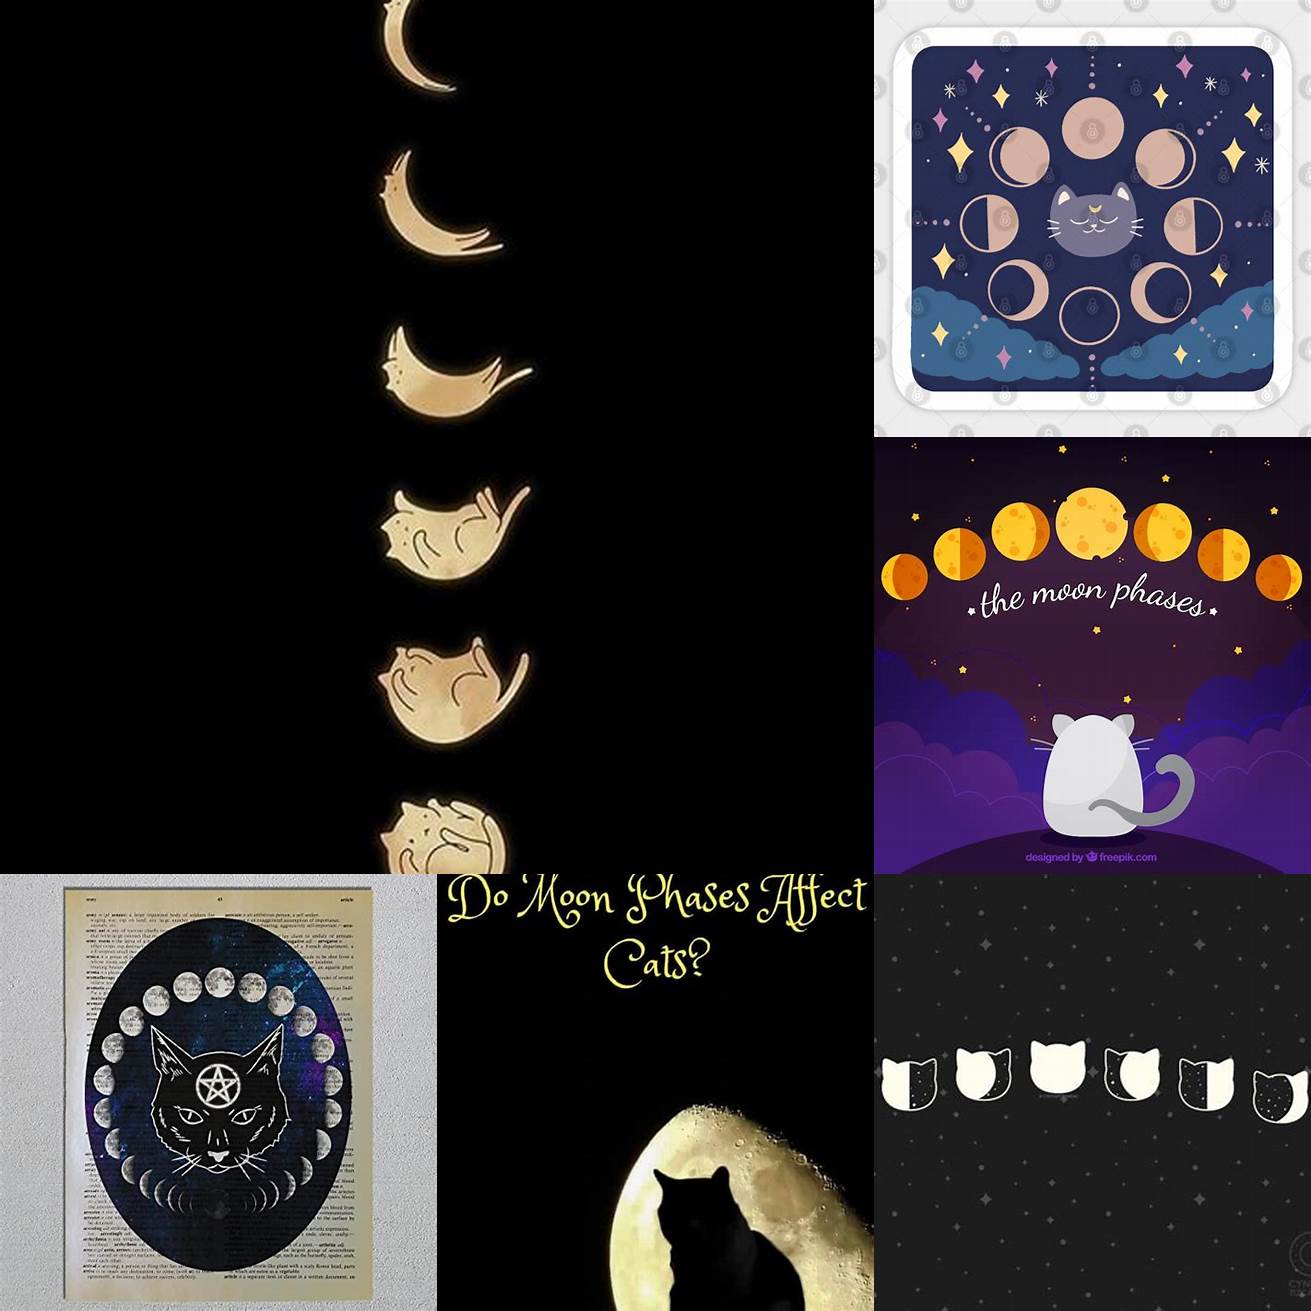 Cat and moon phases